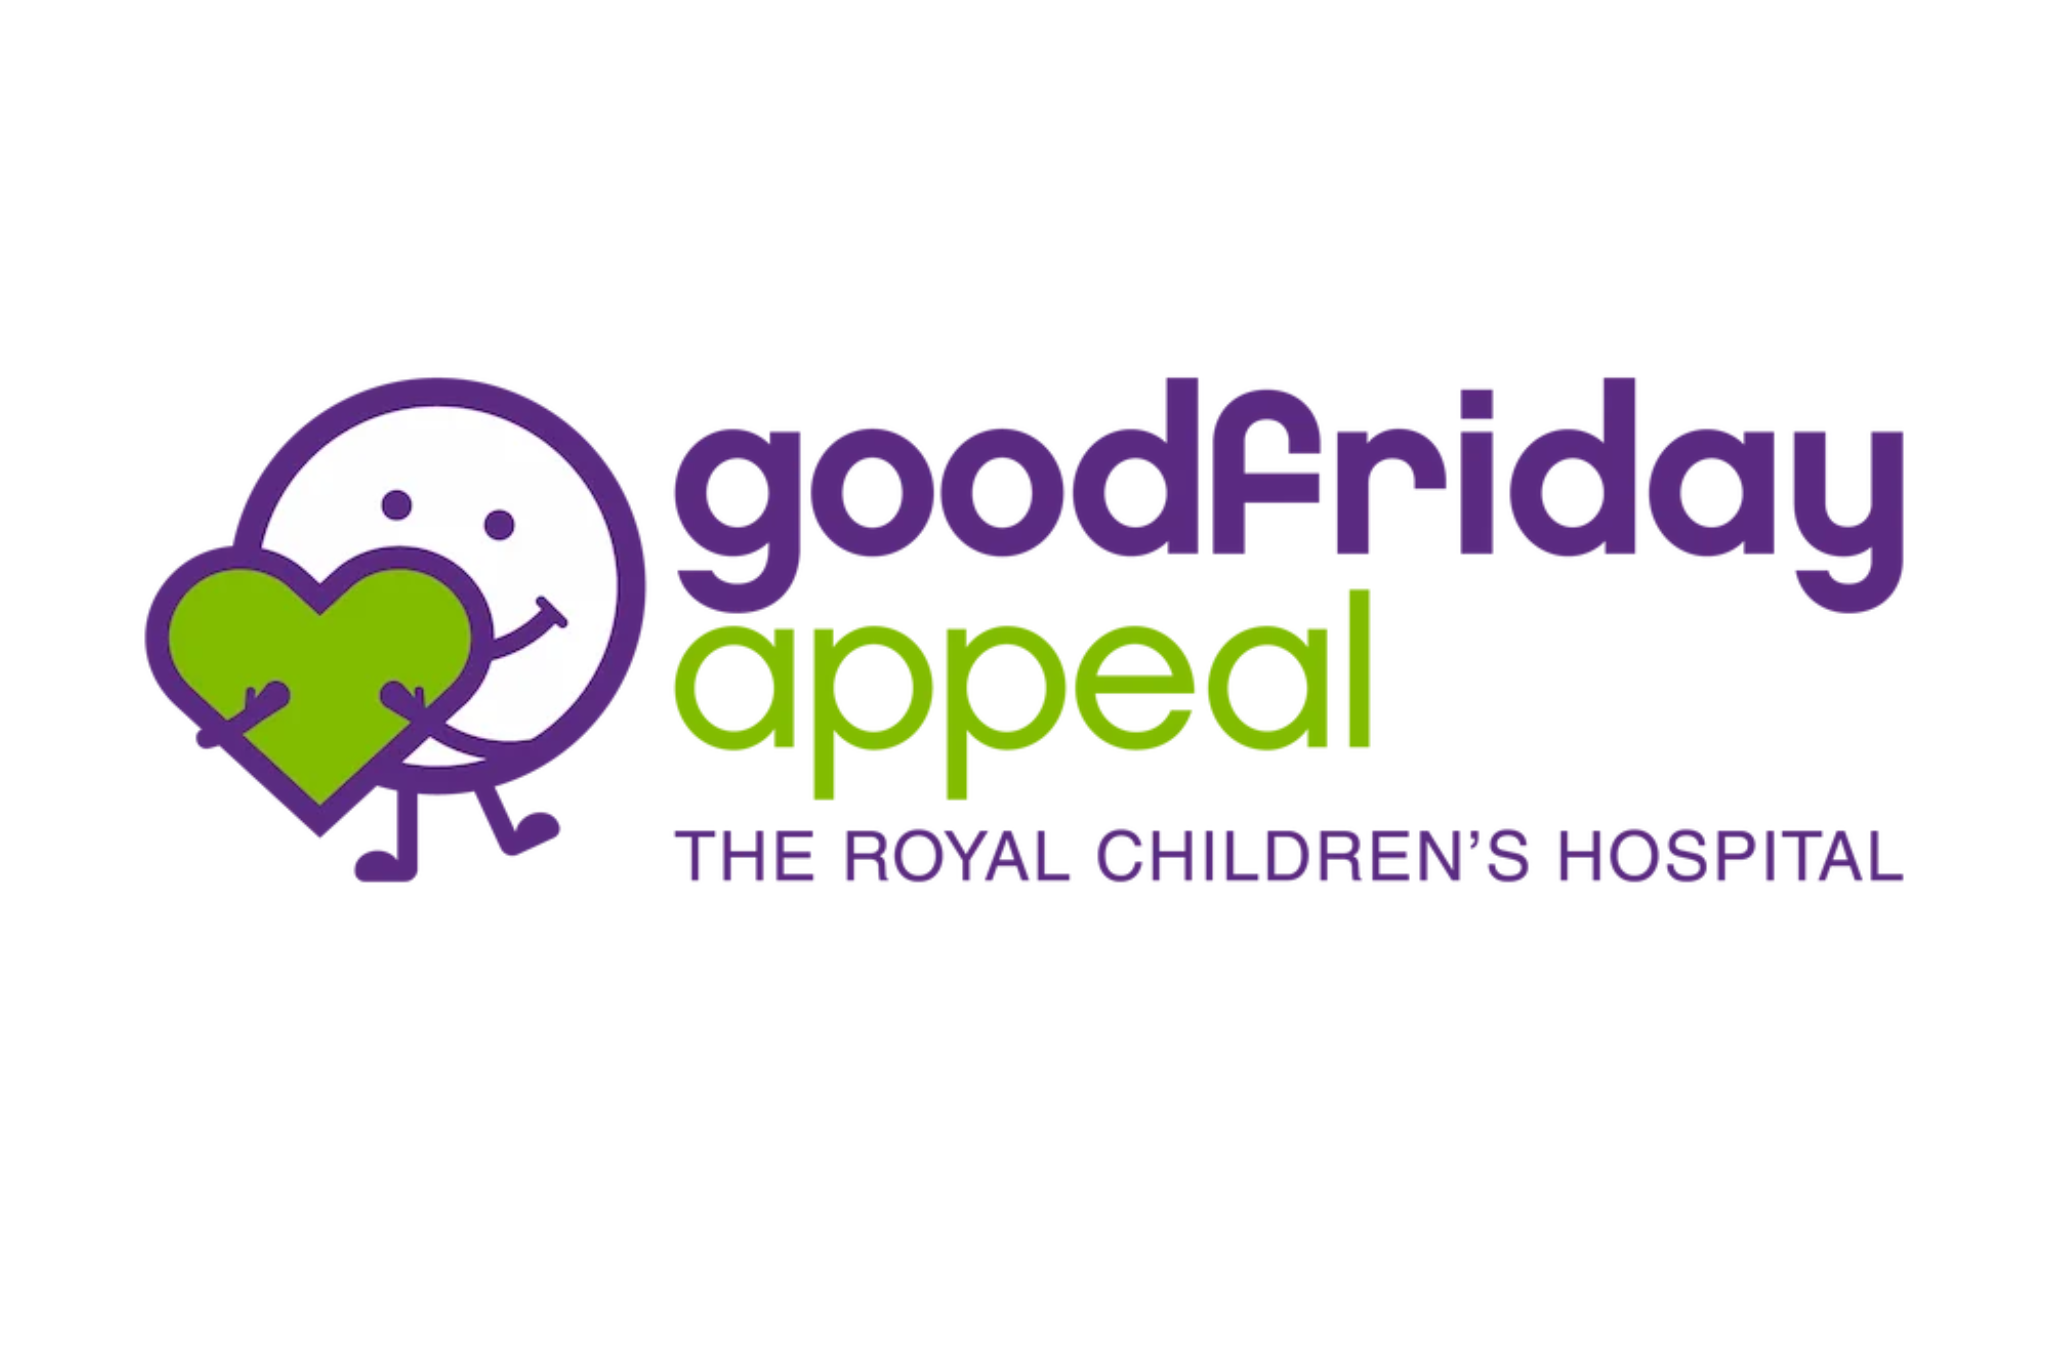 VRC the Good Friday Appeal as new community partner